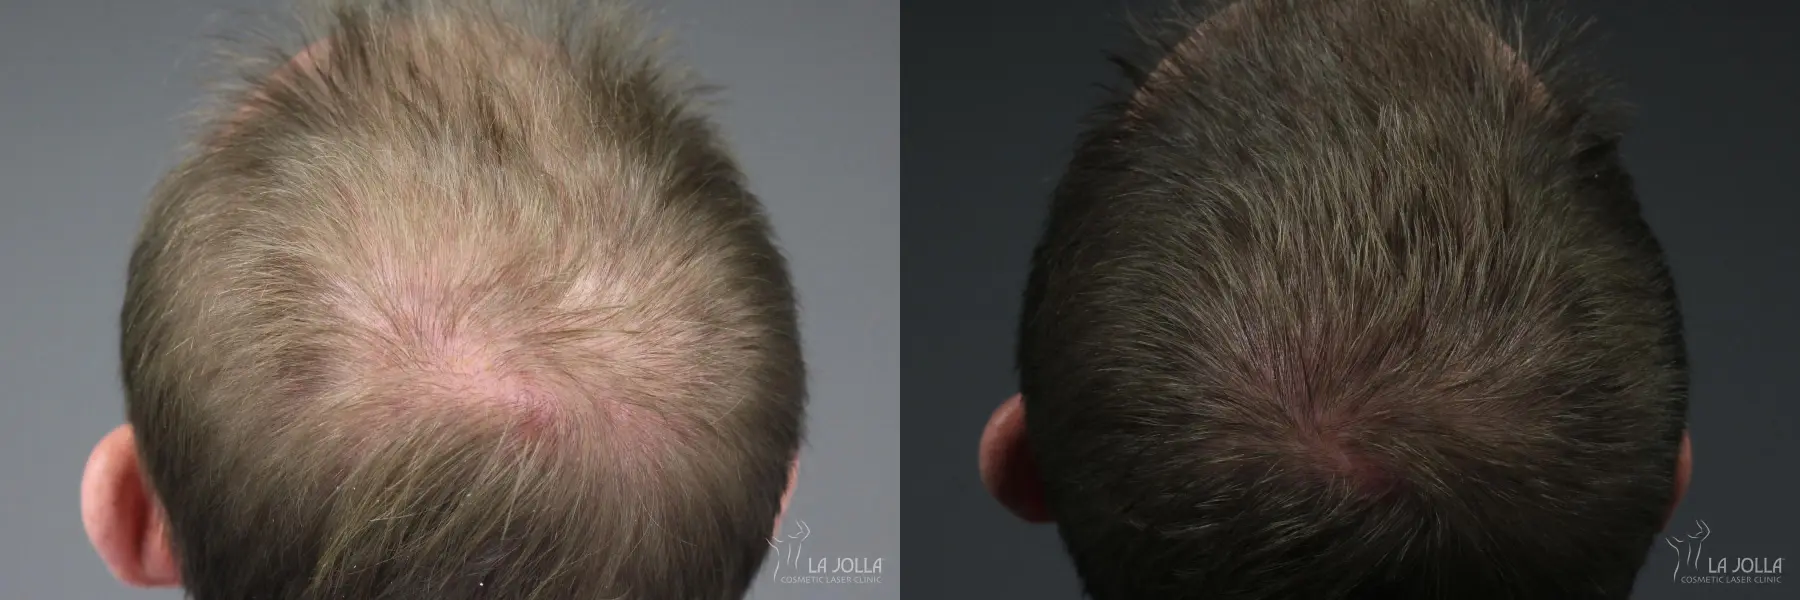 Hair Restoration: Patient 7 - Before and After 2